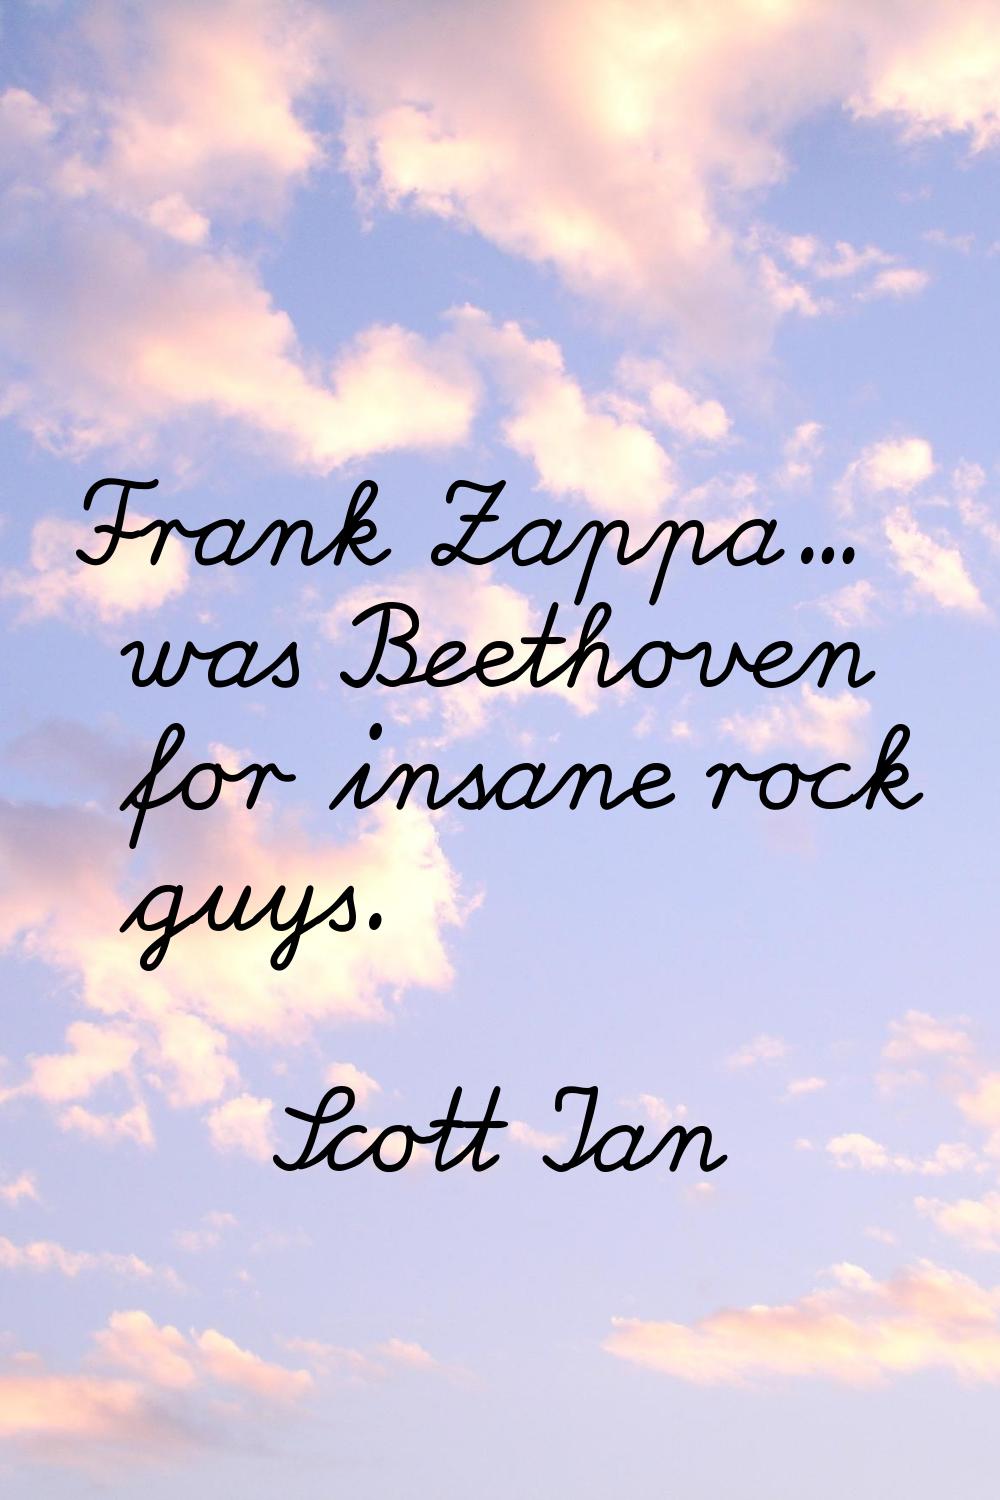 Frank Zappa... was Beethoven for insane rock guys.